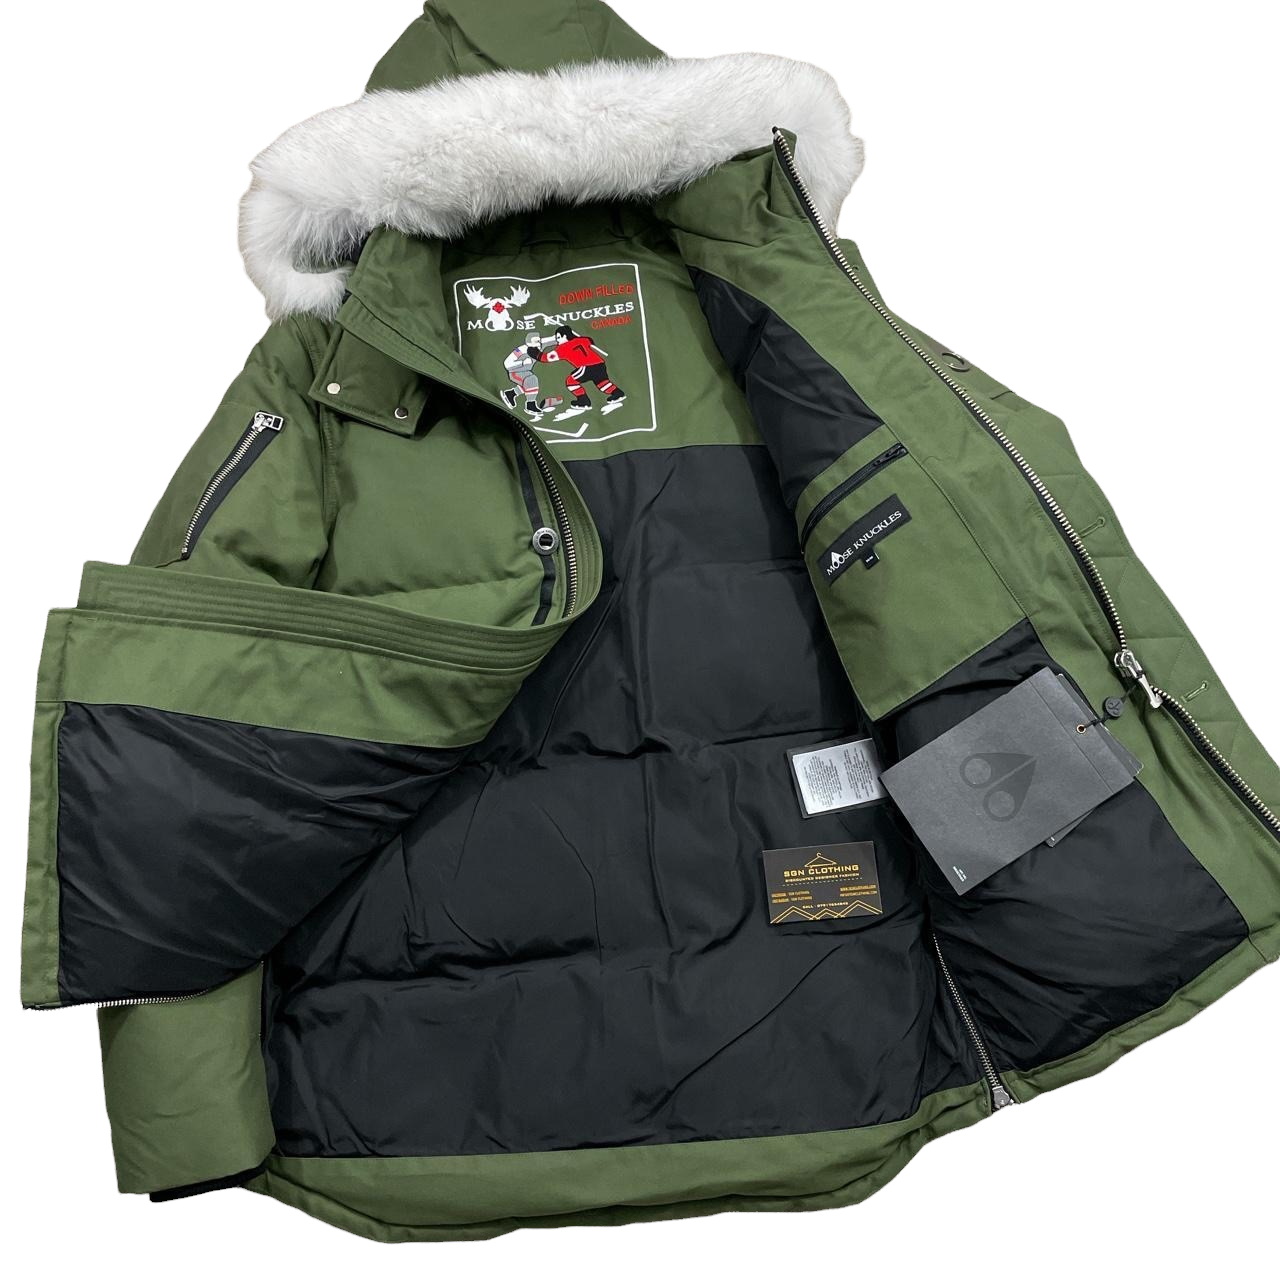 MOOSE KNUCKLES 3Q HOODED PARKA JACKET - ARMY GREEN